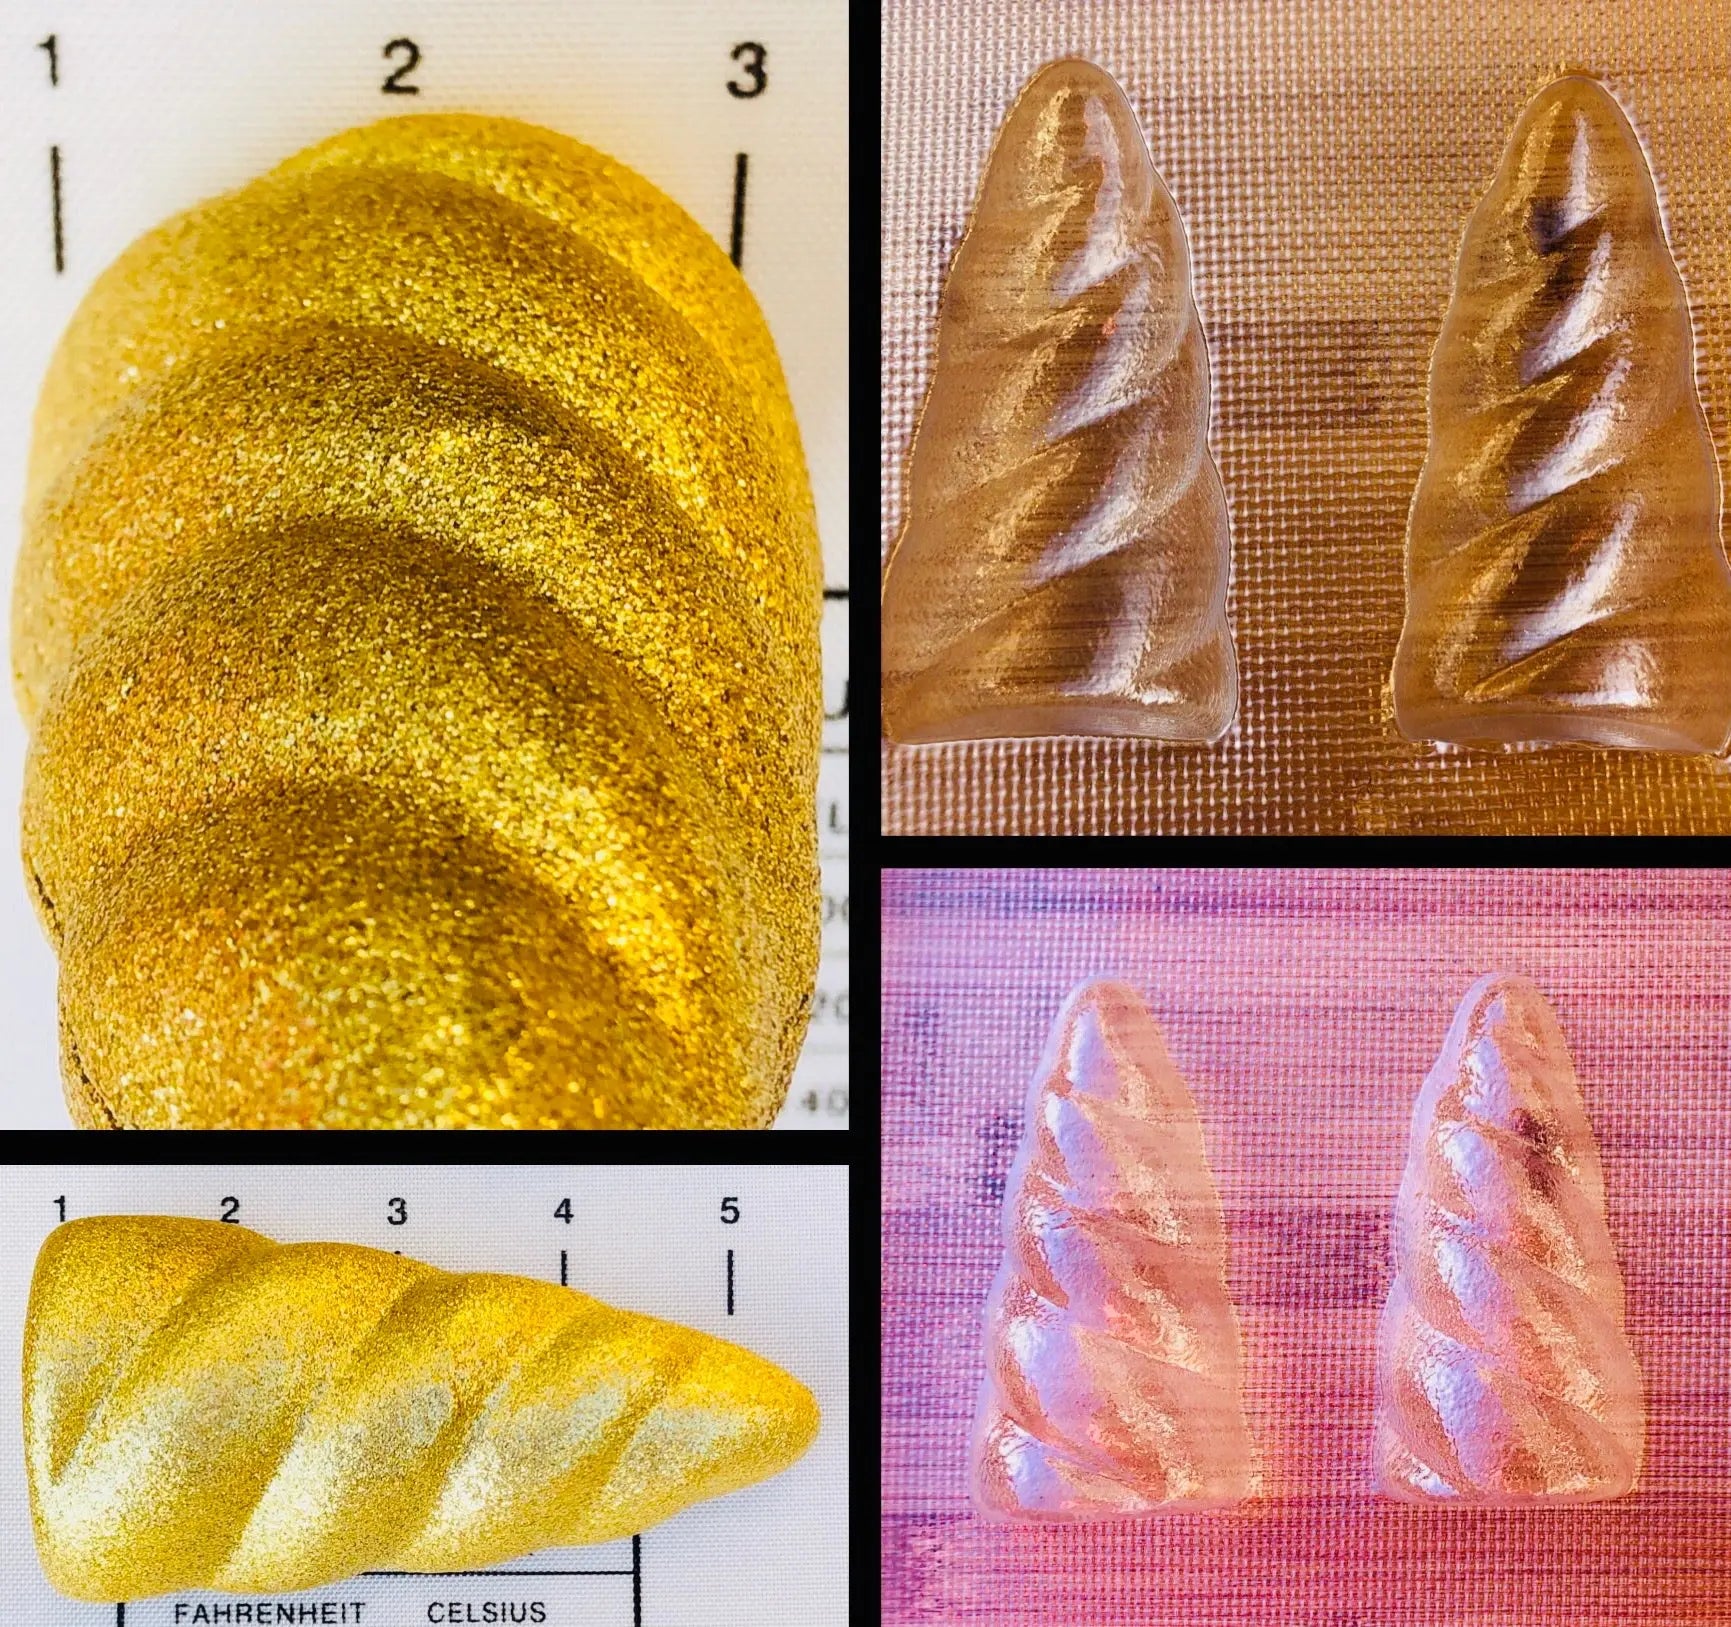 Unicorn horn - chocolate mould -inspired - bath bomb mould MEG cookie cutters